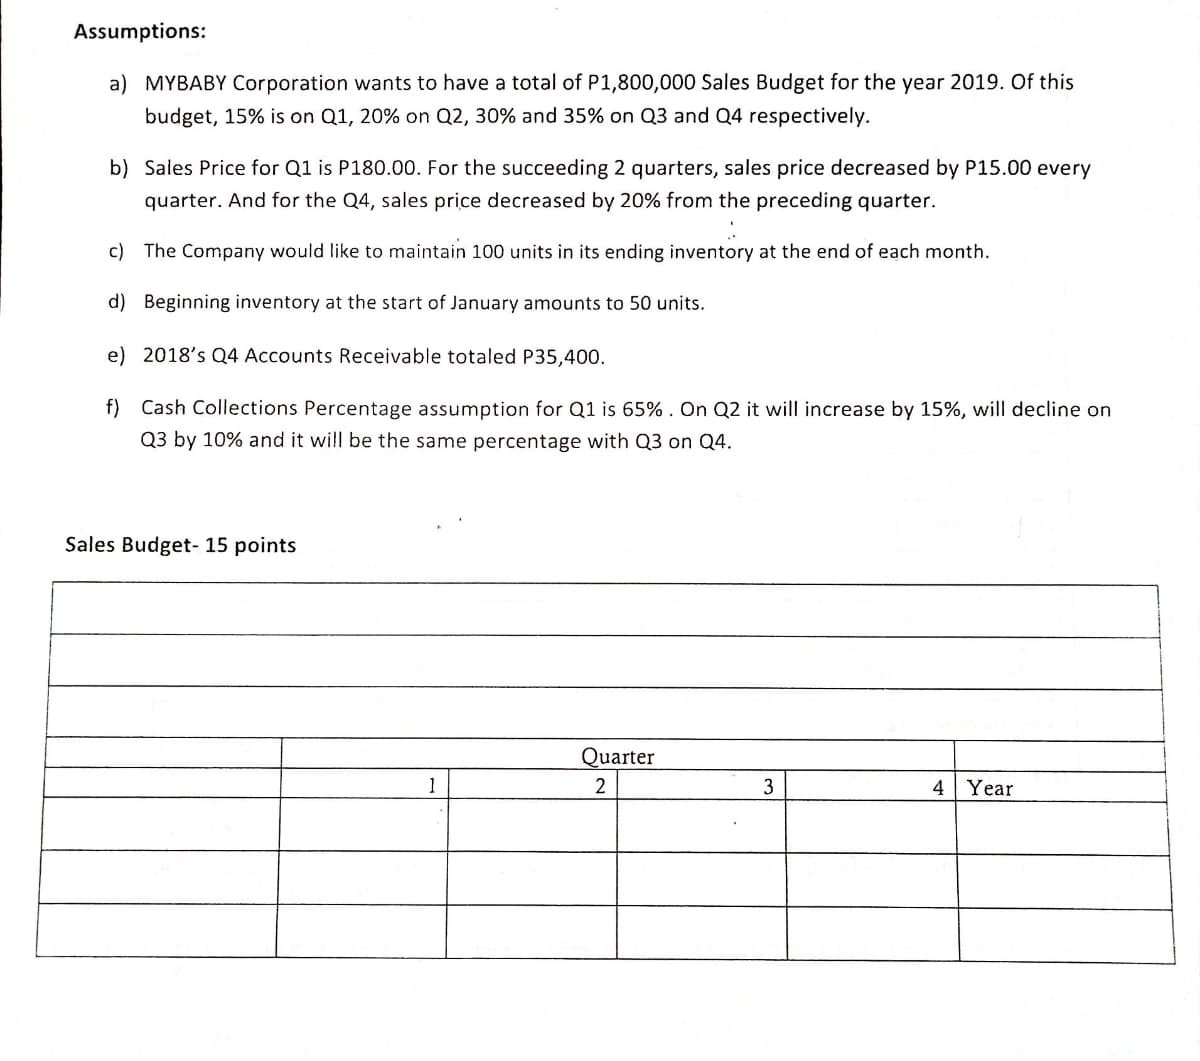 Assumptions:
a) MYBABY Corporation wants to have a total of P1,800,000 Sales Budget for the year 2019. Of this
budget, 15% is on Q1, 20% on Q2, 30% and 35% on Q3 and Q4 respectively.
b) Sales Price for Q1 is P180.00. For the succeeding 2 quarters, sales price decreased by P15.00 every
quarter. And for the Q4, sales price decreased by 20% from the preceding quarter.
c) The Company would like to maintain 100 units in its ending inventory at the end of each month.
d) Beginning inventory at the start of January amounts to 50 units.
e) 2018's Q4 Accounts Receivable totaled P35,400.
f) Cash Collections Percentage assumption for Q1 is 65% . On Q2 it will increase by 15%, will decline on
Q3 by 10% and it will be the same percentage with Q3 on Q4.
Sales Budget- 15 points
Quarter
2
3
4
Year
